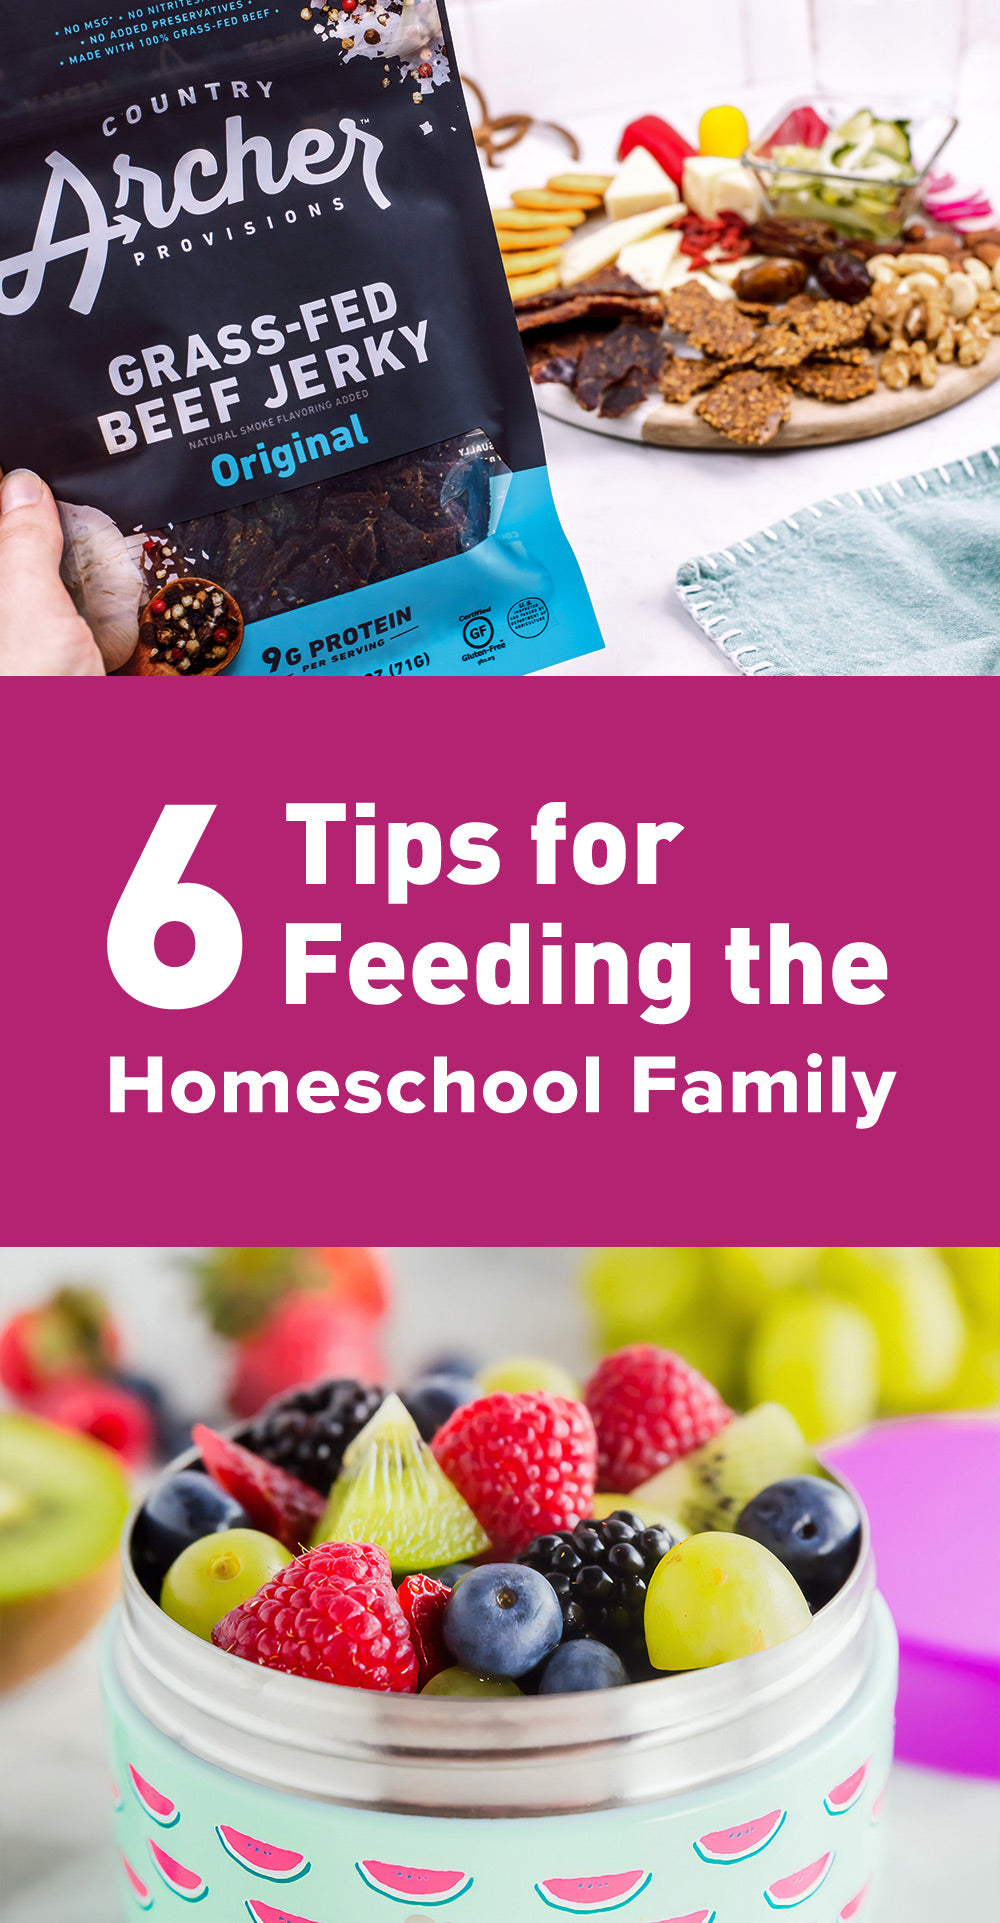 Tips for Feeding the Homeschool Family – Country Archer Provisions